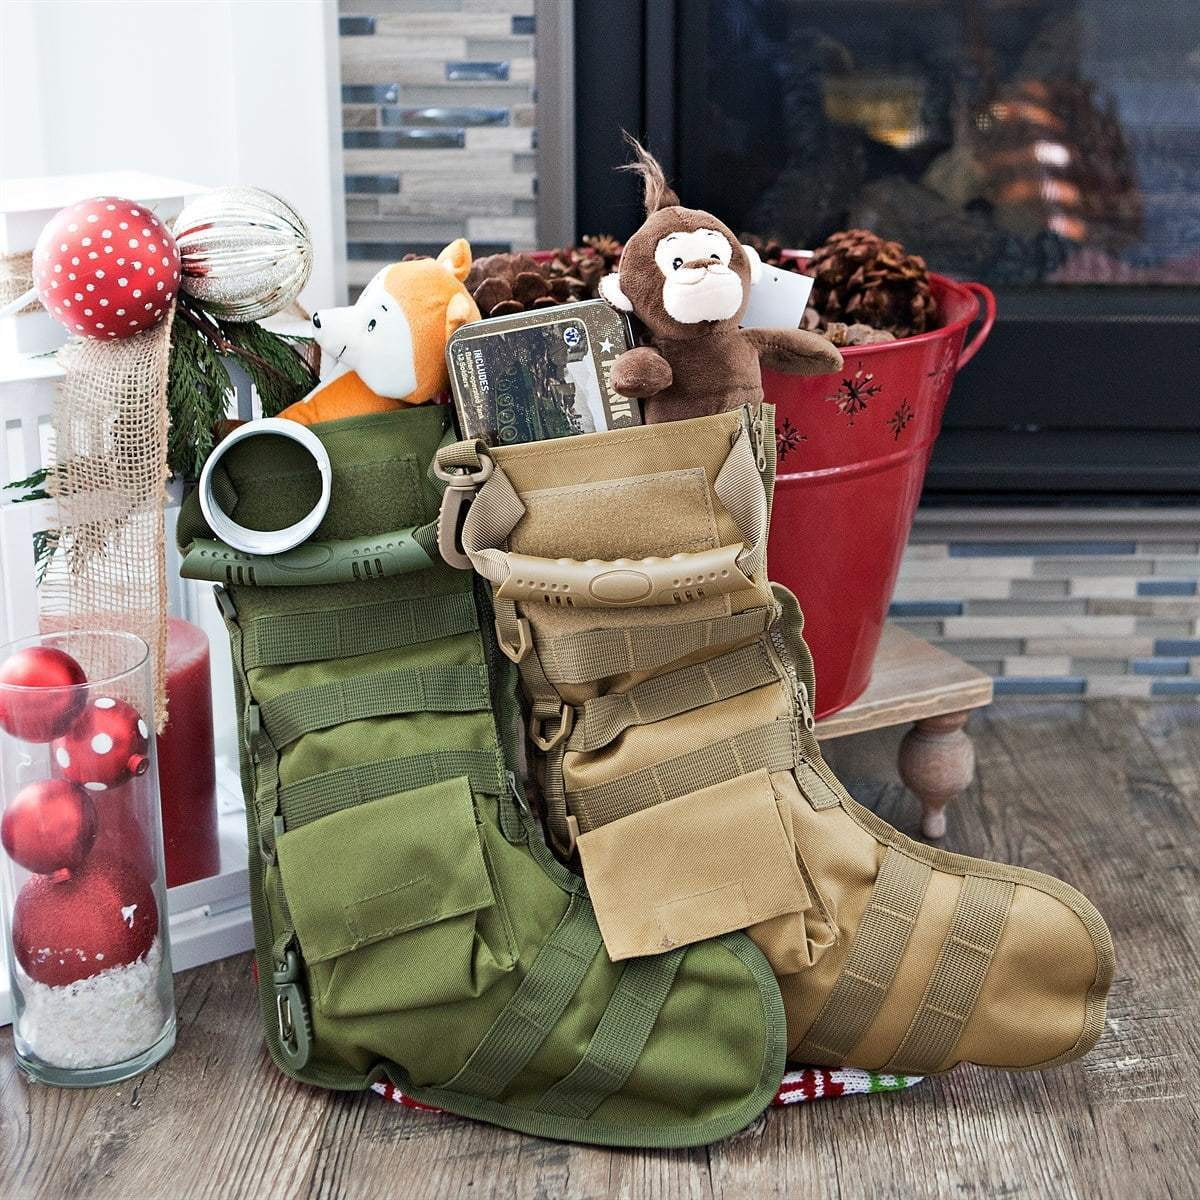 SPECTER GEAR 671 US MILITARY OLIVE DRAB TACTICAL CHRISTMAS STOCKING X-MAS USA 